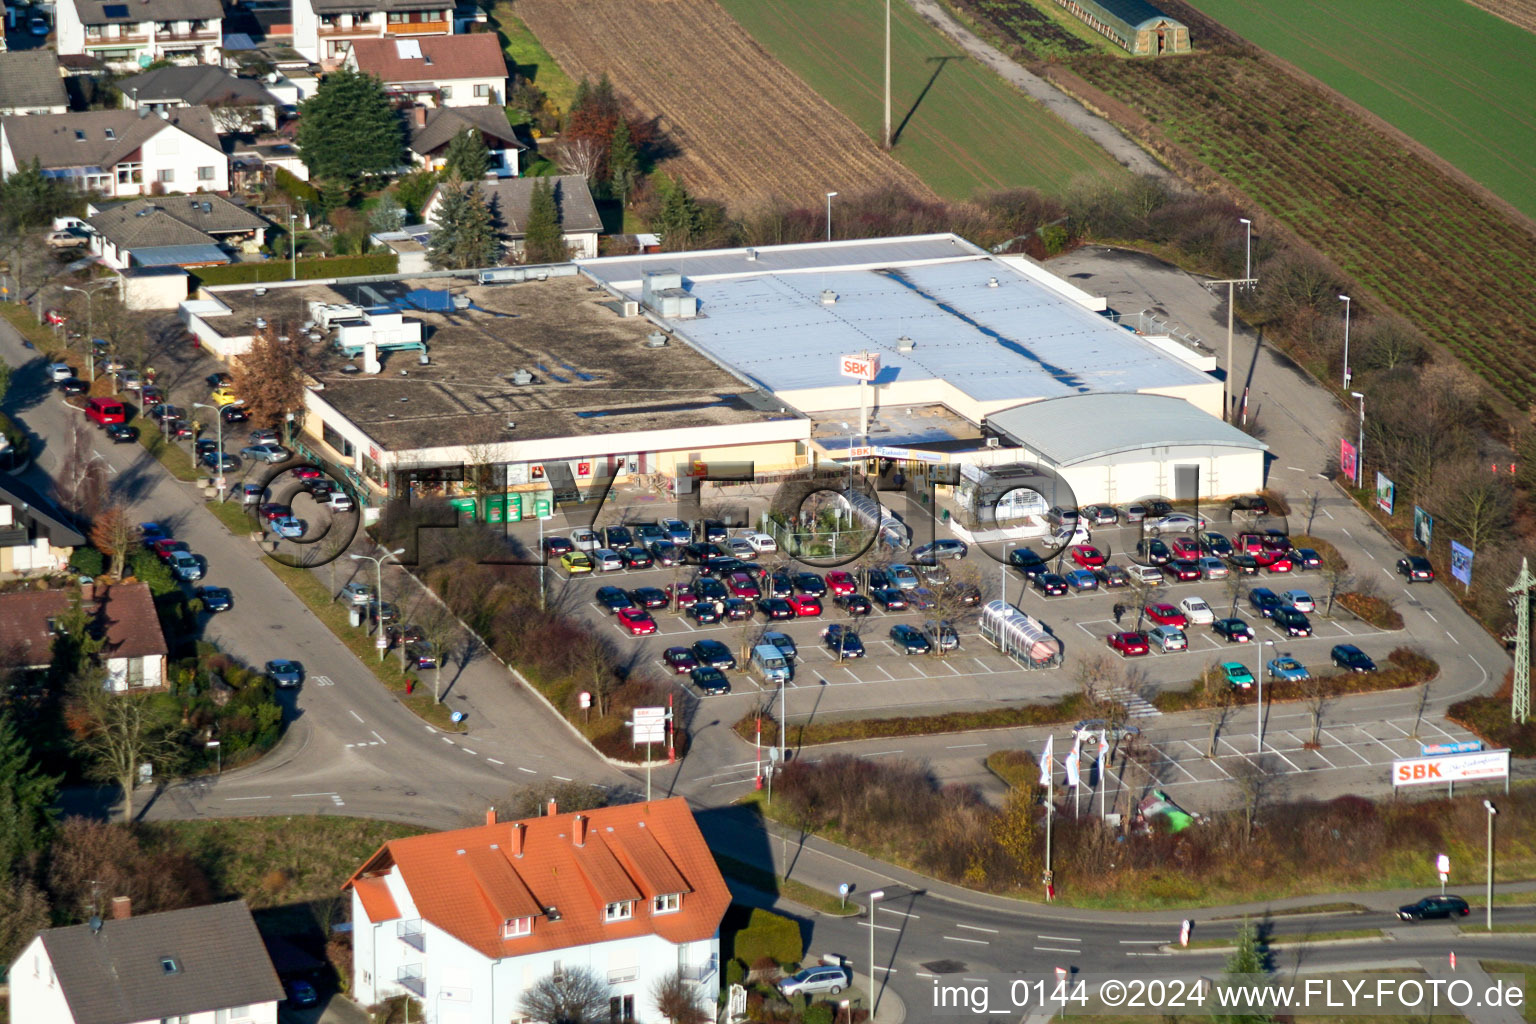 Store of the Supermarket SBK in Kandel in the state Rhineland-Palatinate